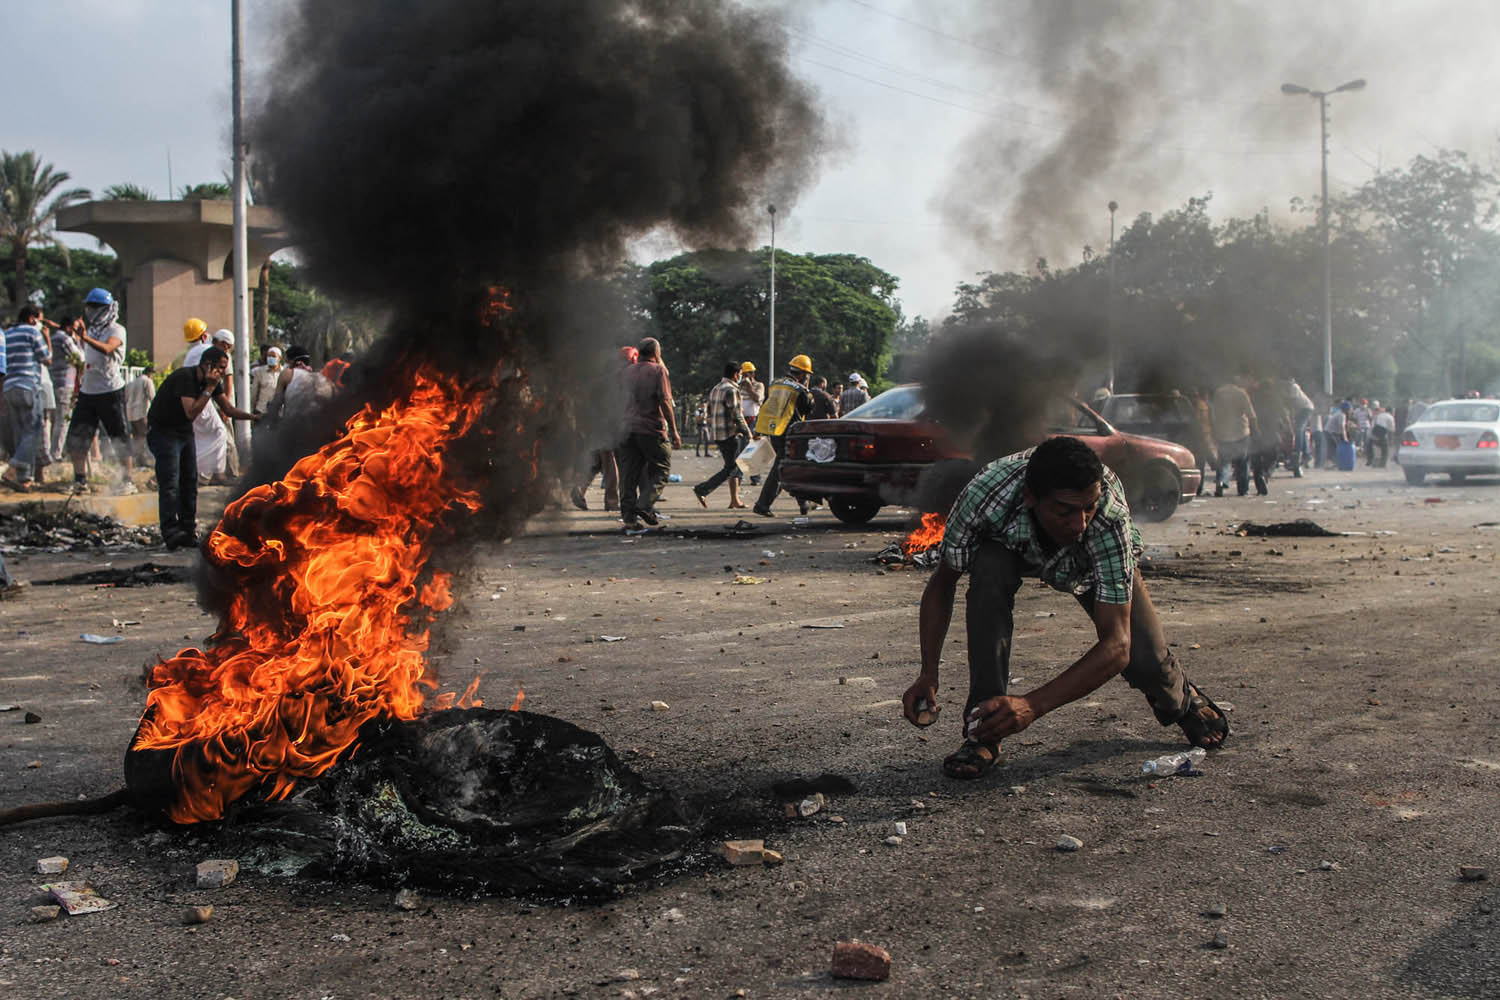 July 27, 2013. A Morsi supporter grabs rocks during clashes with police forces near the Rabaa sit-in.